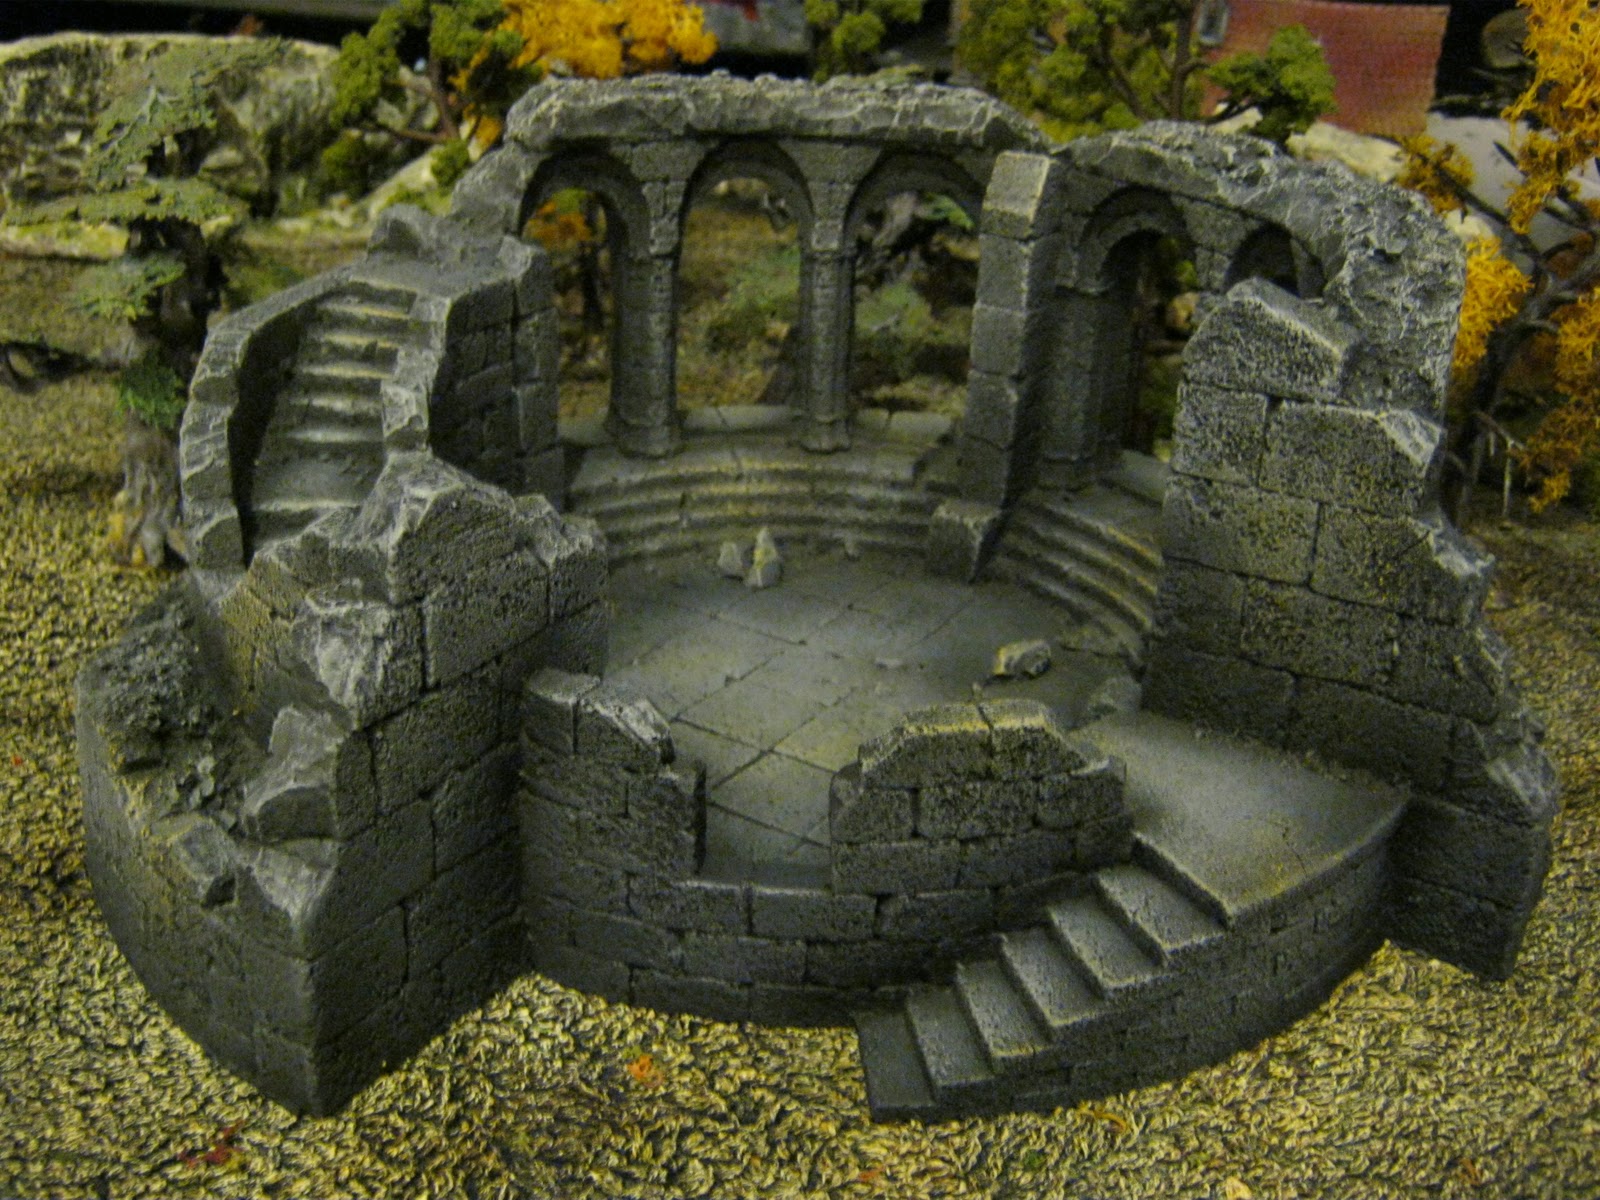 Table de jeu Arpenteurs - Page 3 Lord+of+the+Rings+Weathertop+Scenery+Piece+011